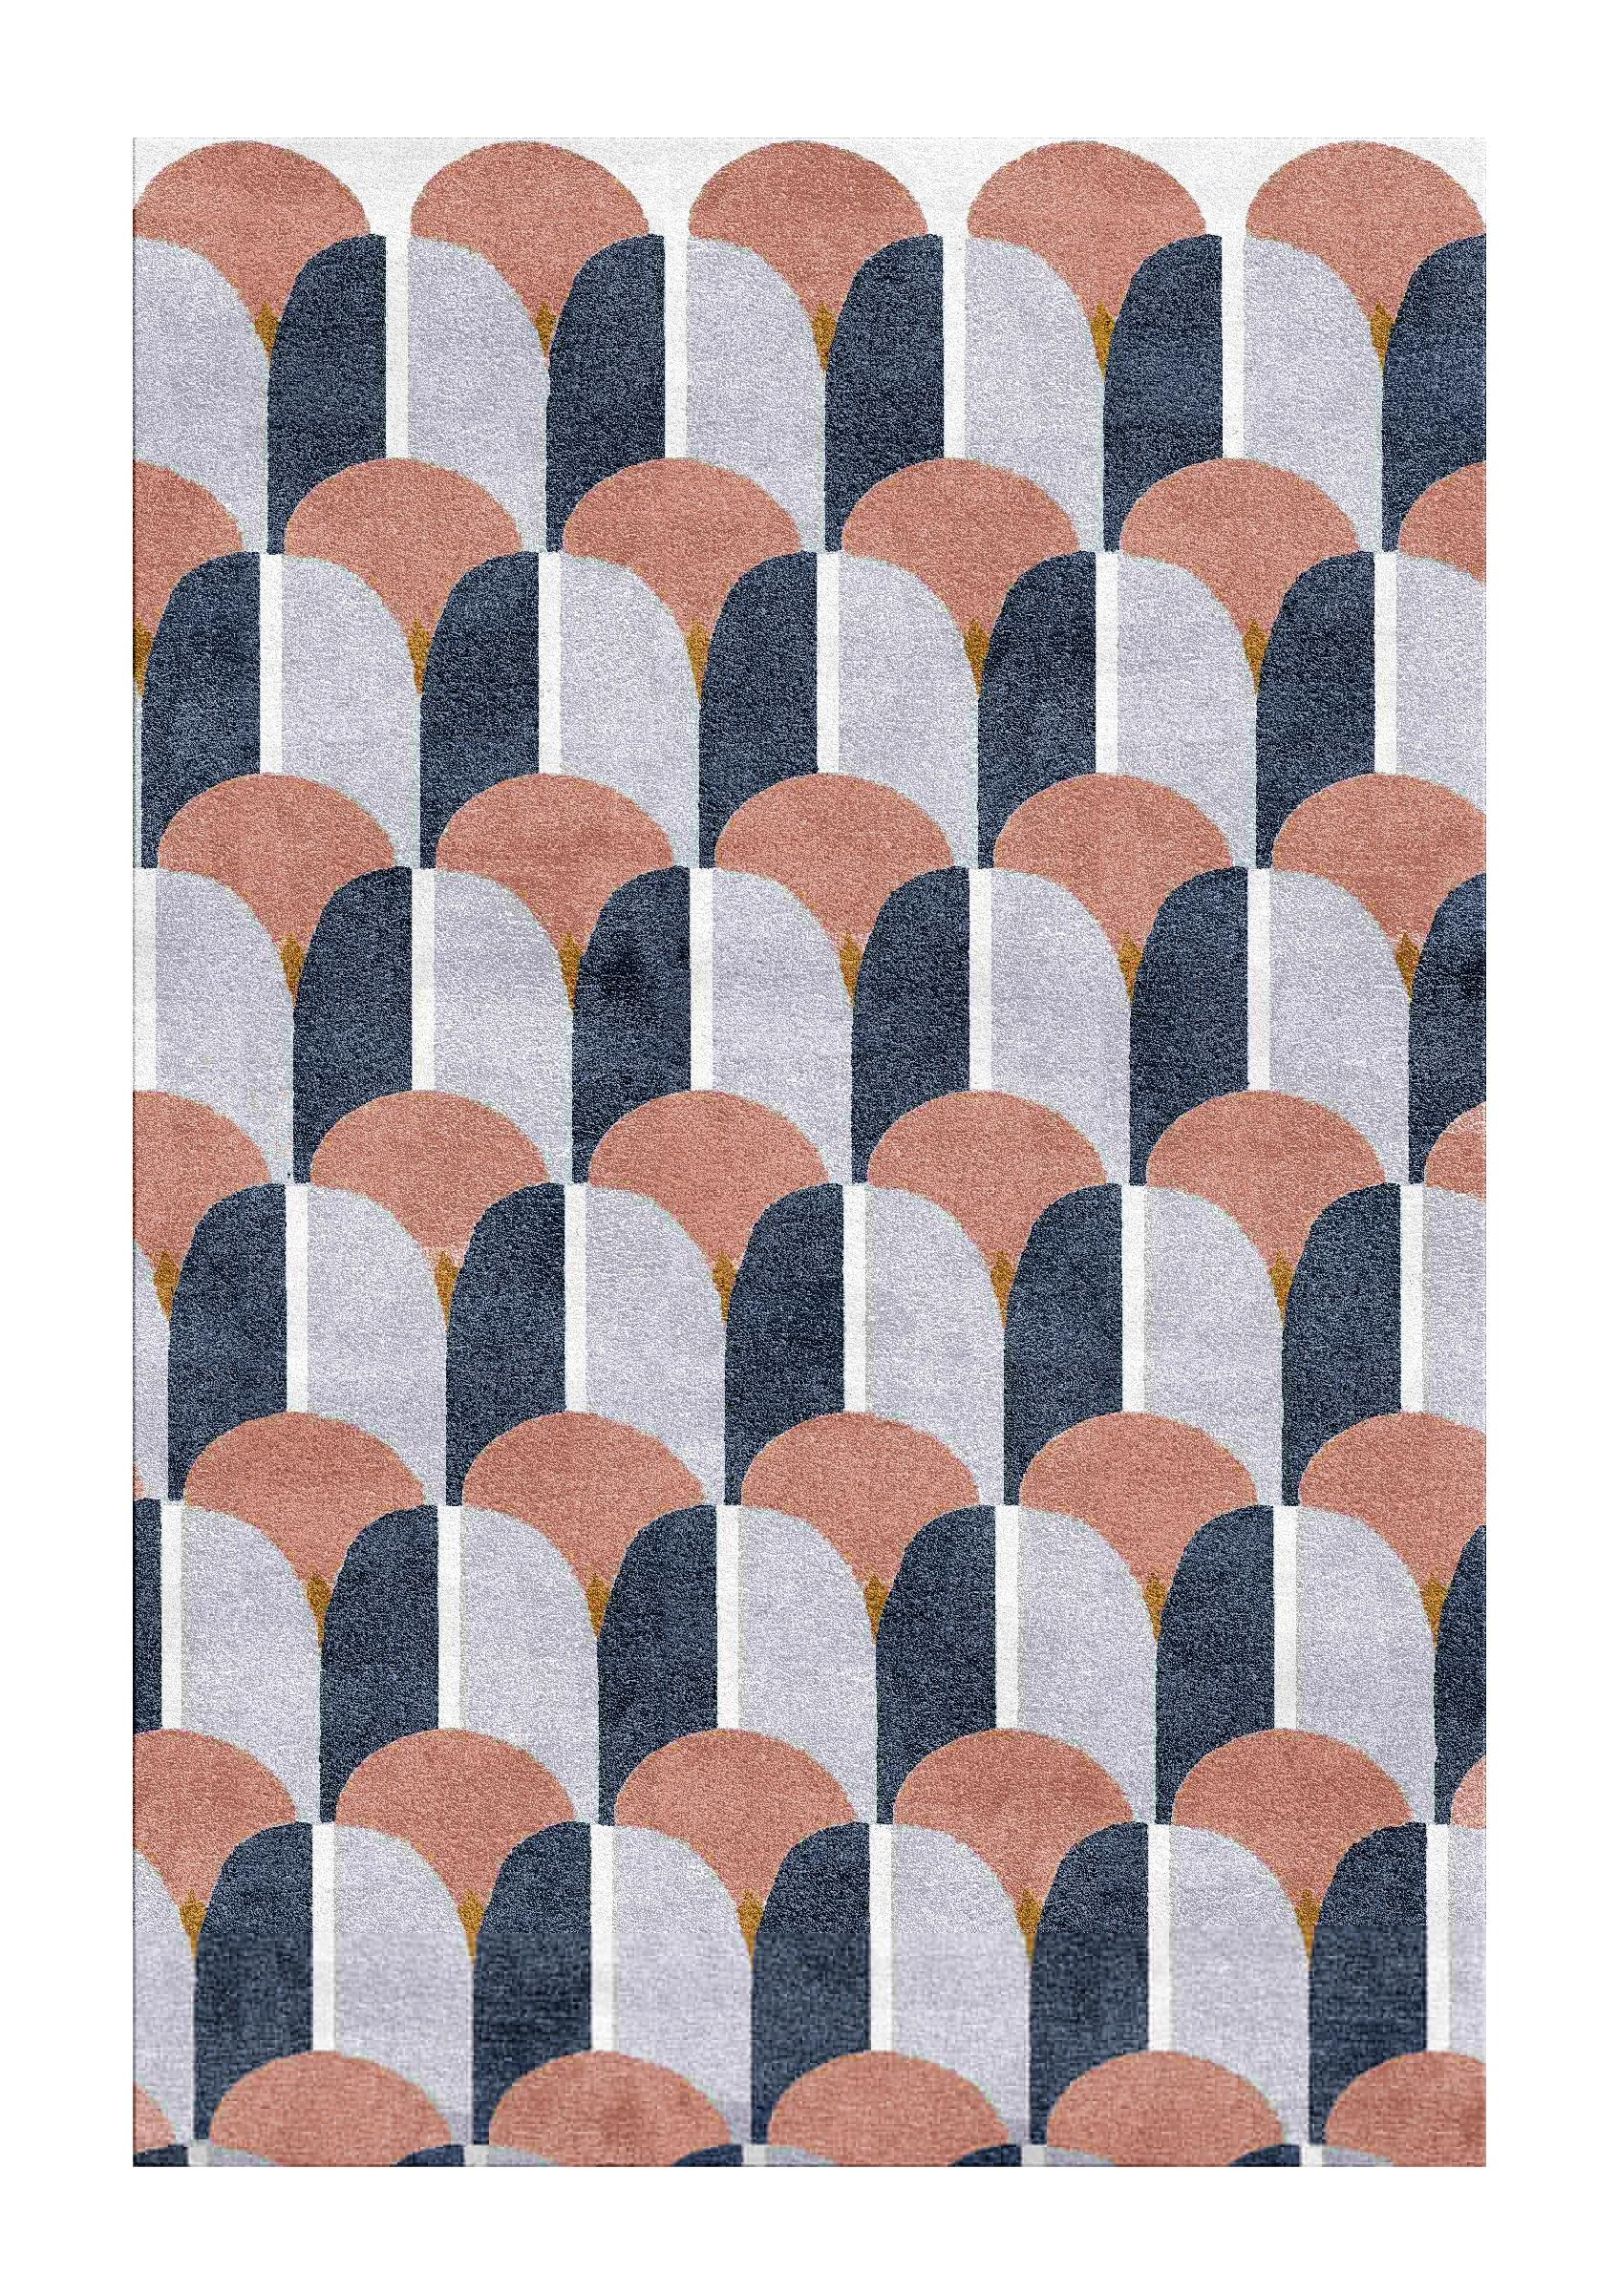 Rinascimento rug I by Sarah Balivo
Dimensions: D 300 x W 200 cm
Materials: Viscose, linen
Available in other colors.

The Rinascimento collection drives its inspiration from Renaissance floorings, a pure chromatic interplay meant to create a